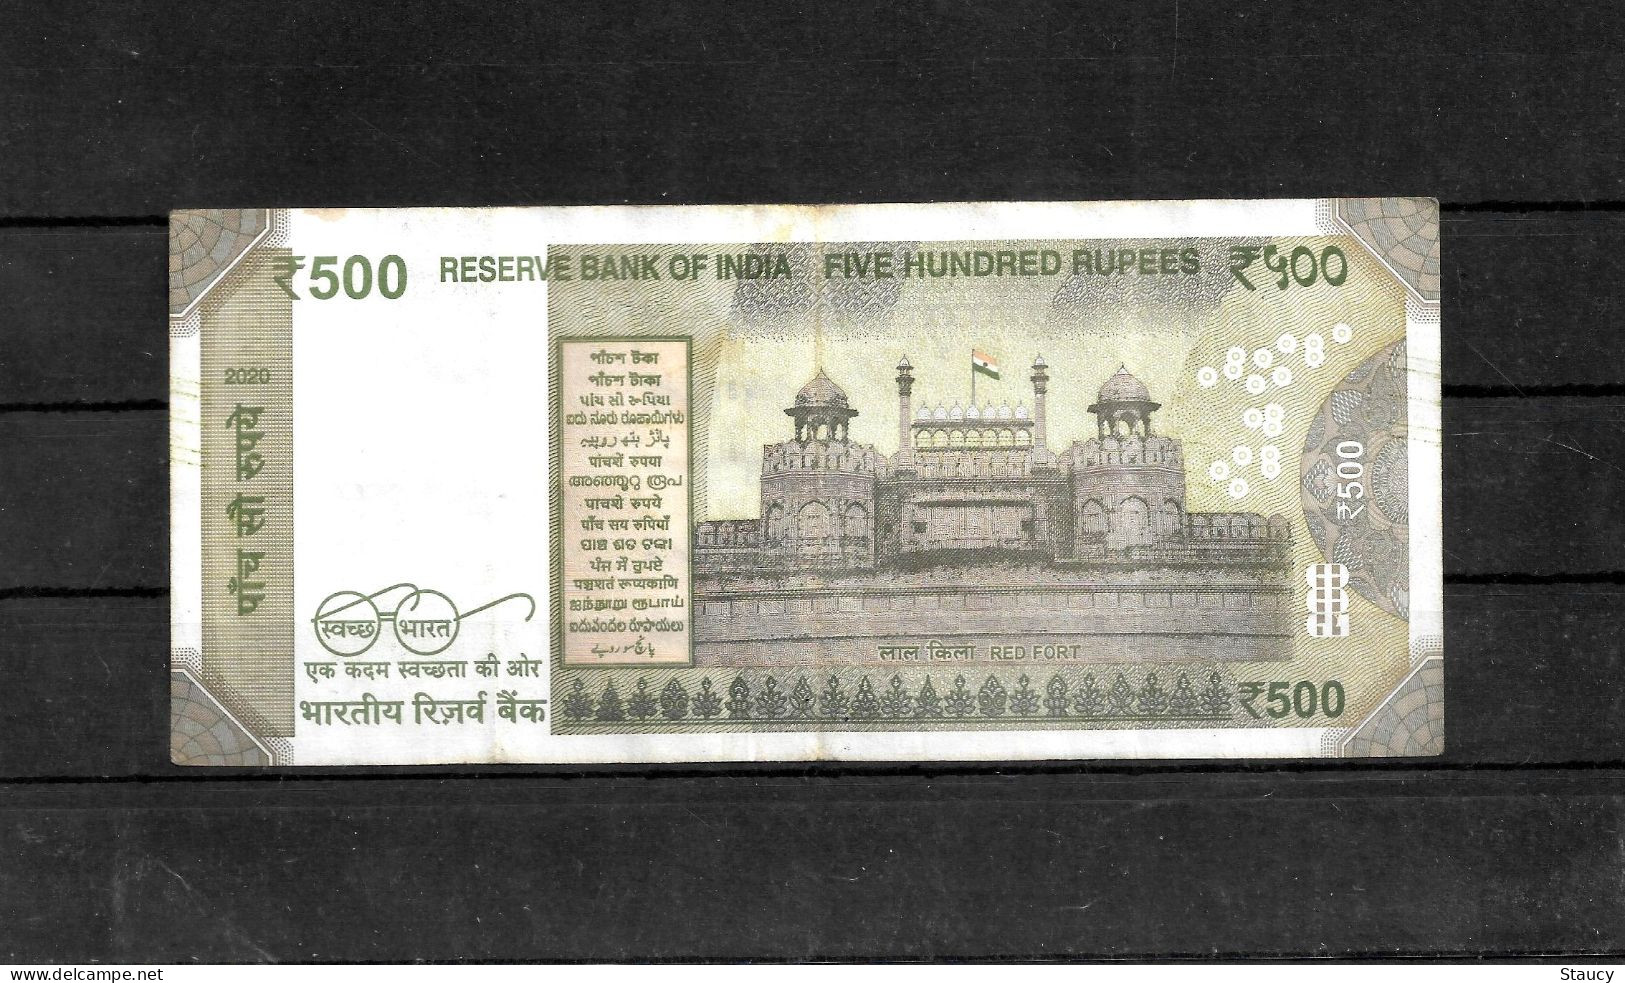 INDIA 2020 Rs. 500.00 Rupees Note Fancy / Holy / Religious Number "786" 731786" USED 100% Genuine Guaranteed As Per Scan - Inde